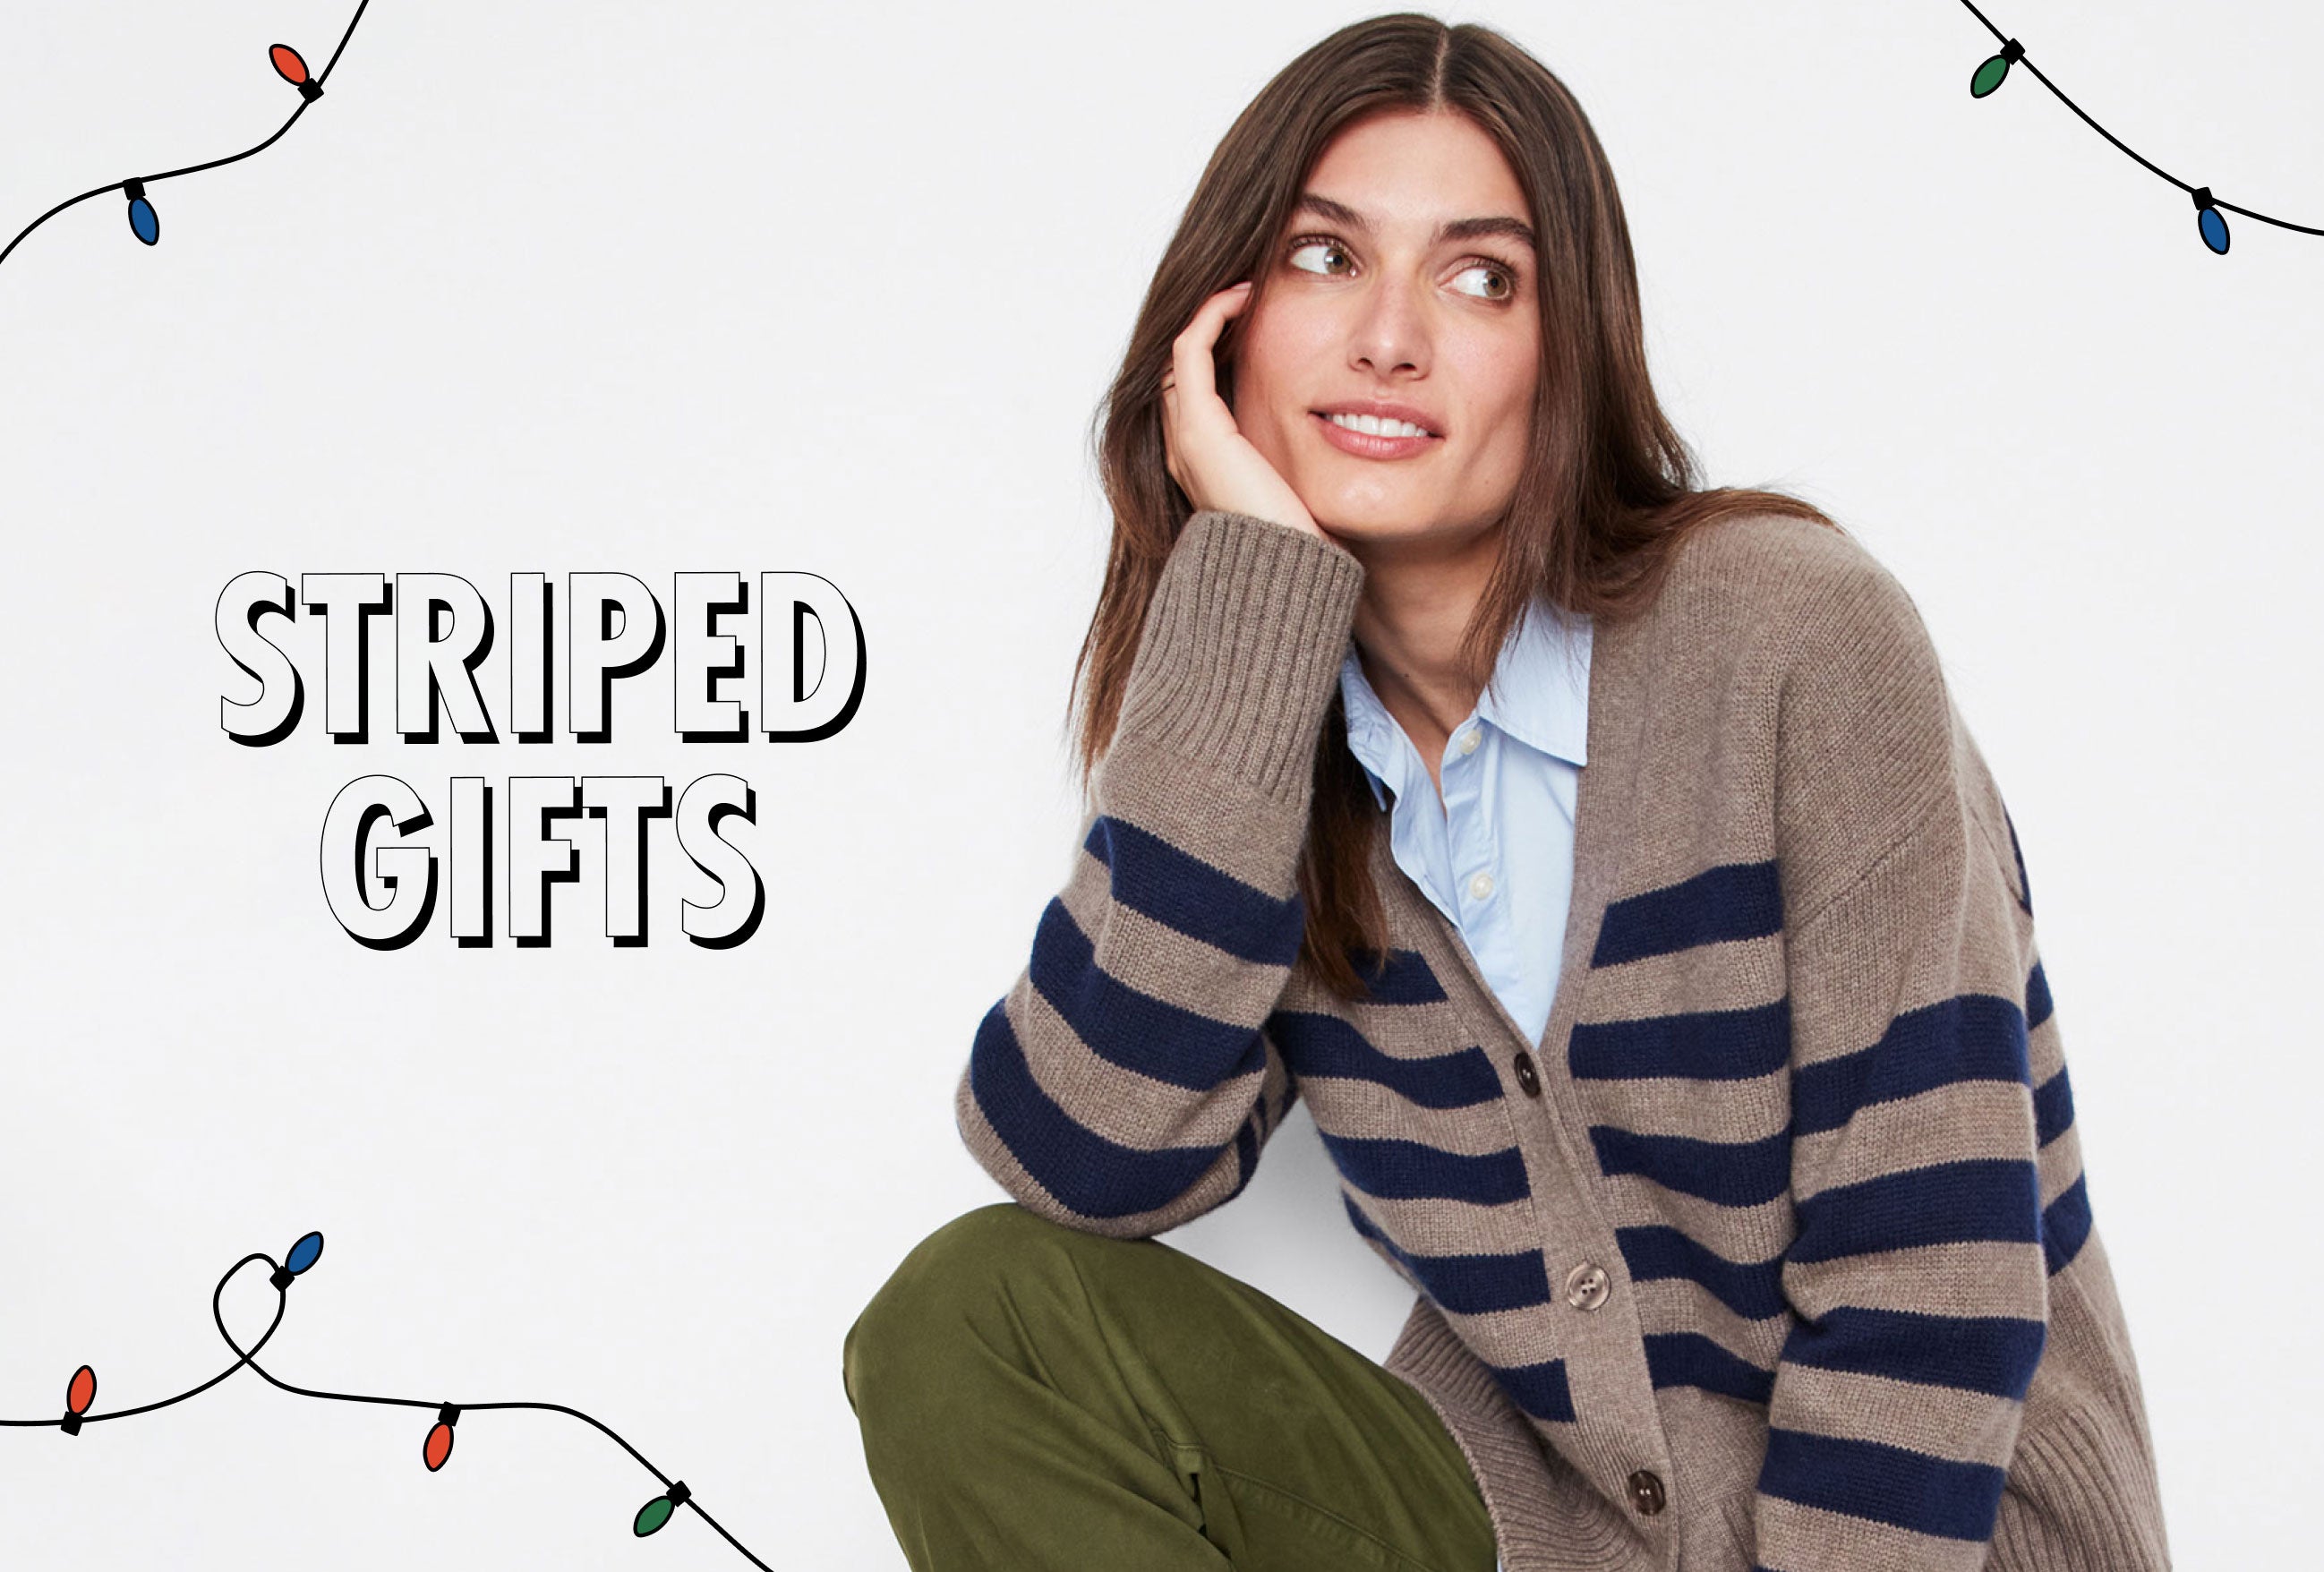 STRIPED GIFTS